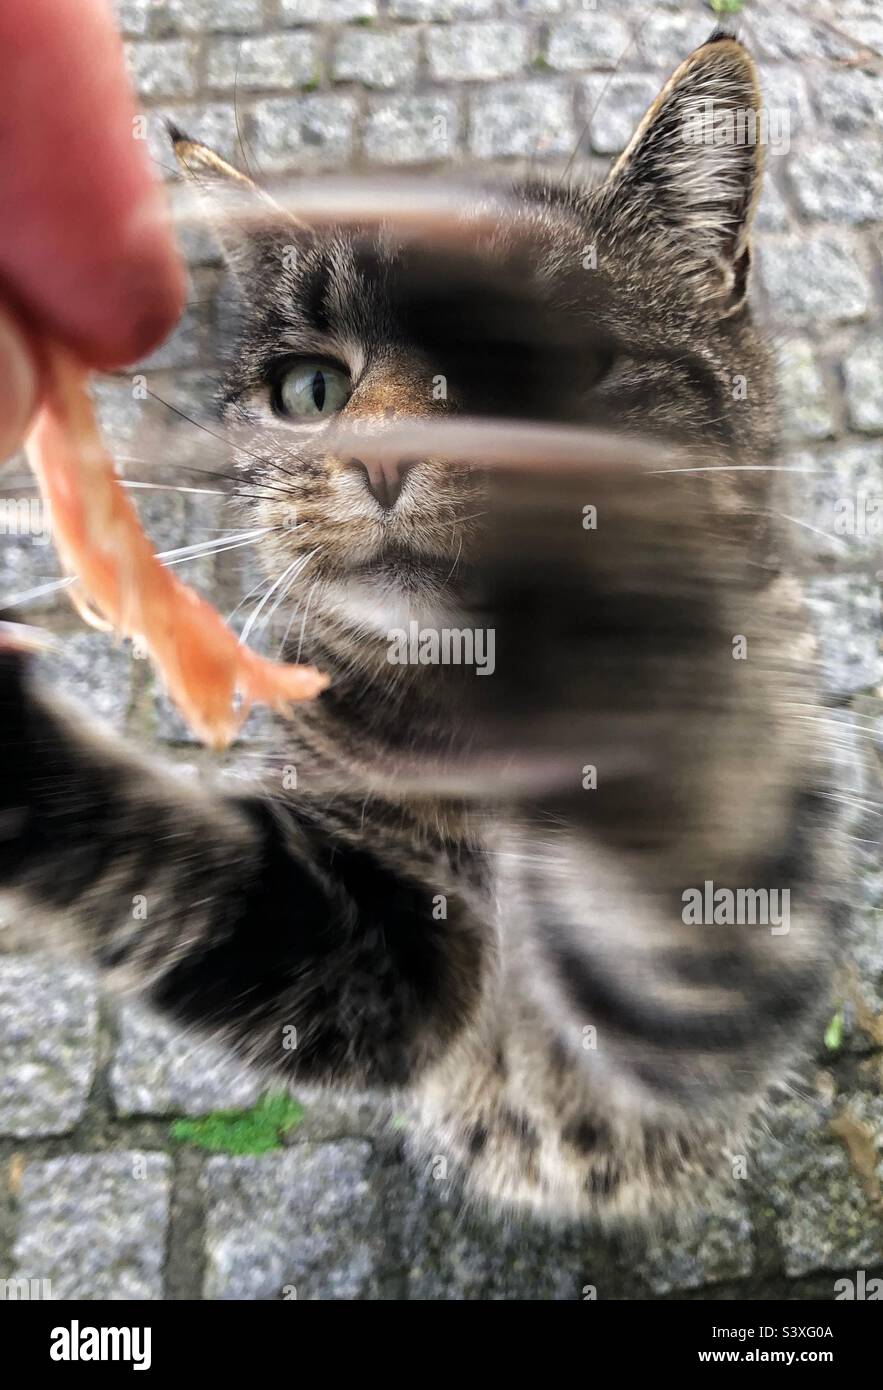 Close-up of a hungry cat swiping with its claw at a piece of meat and being fed by a human Stock Photo